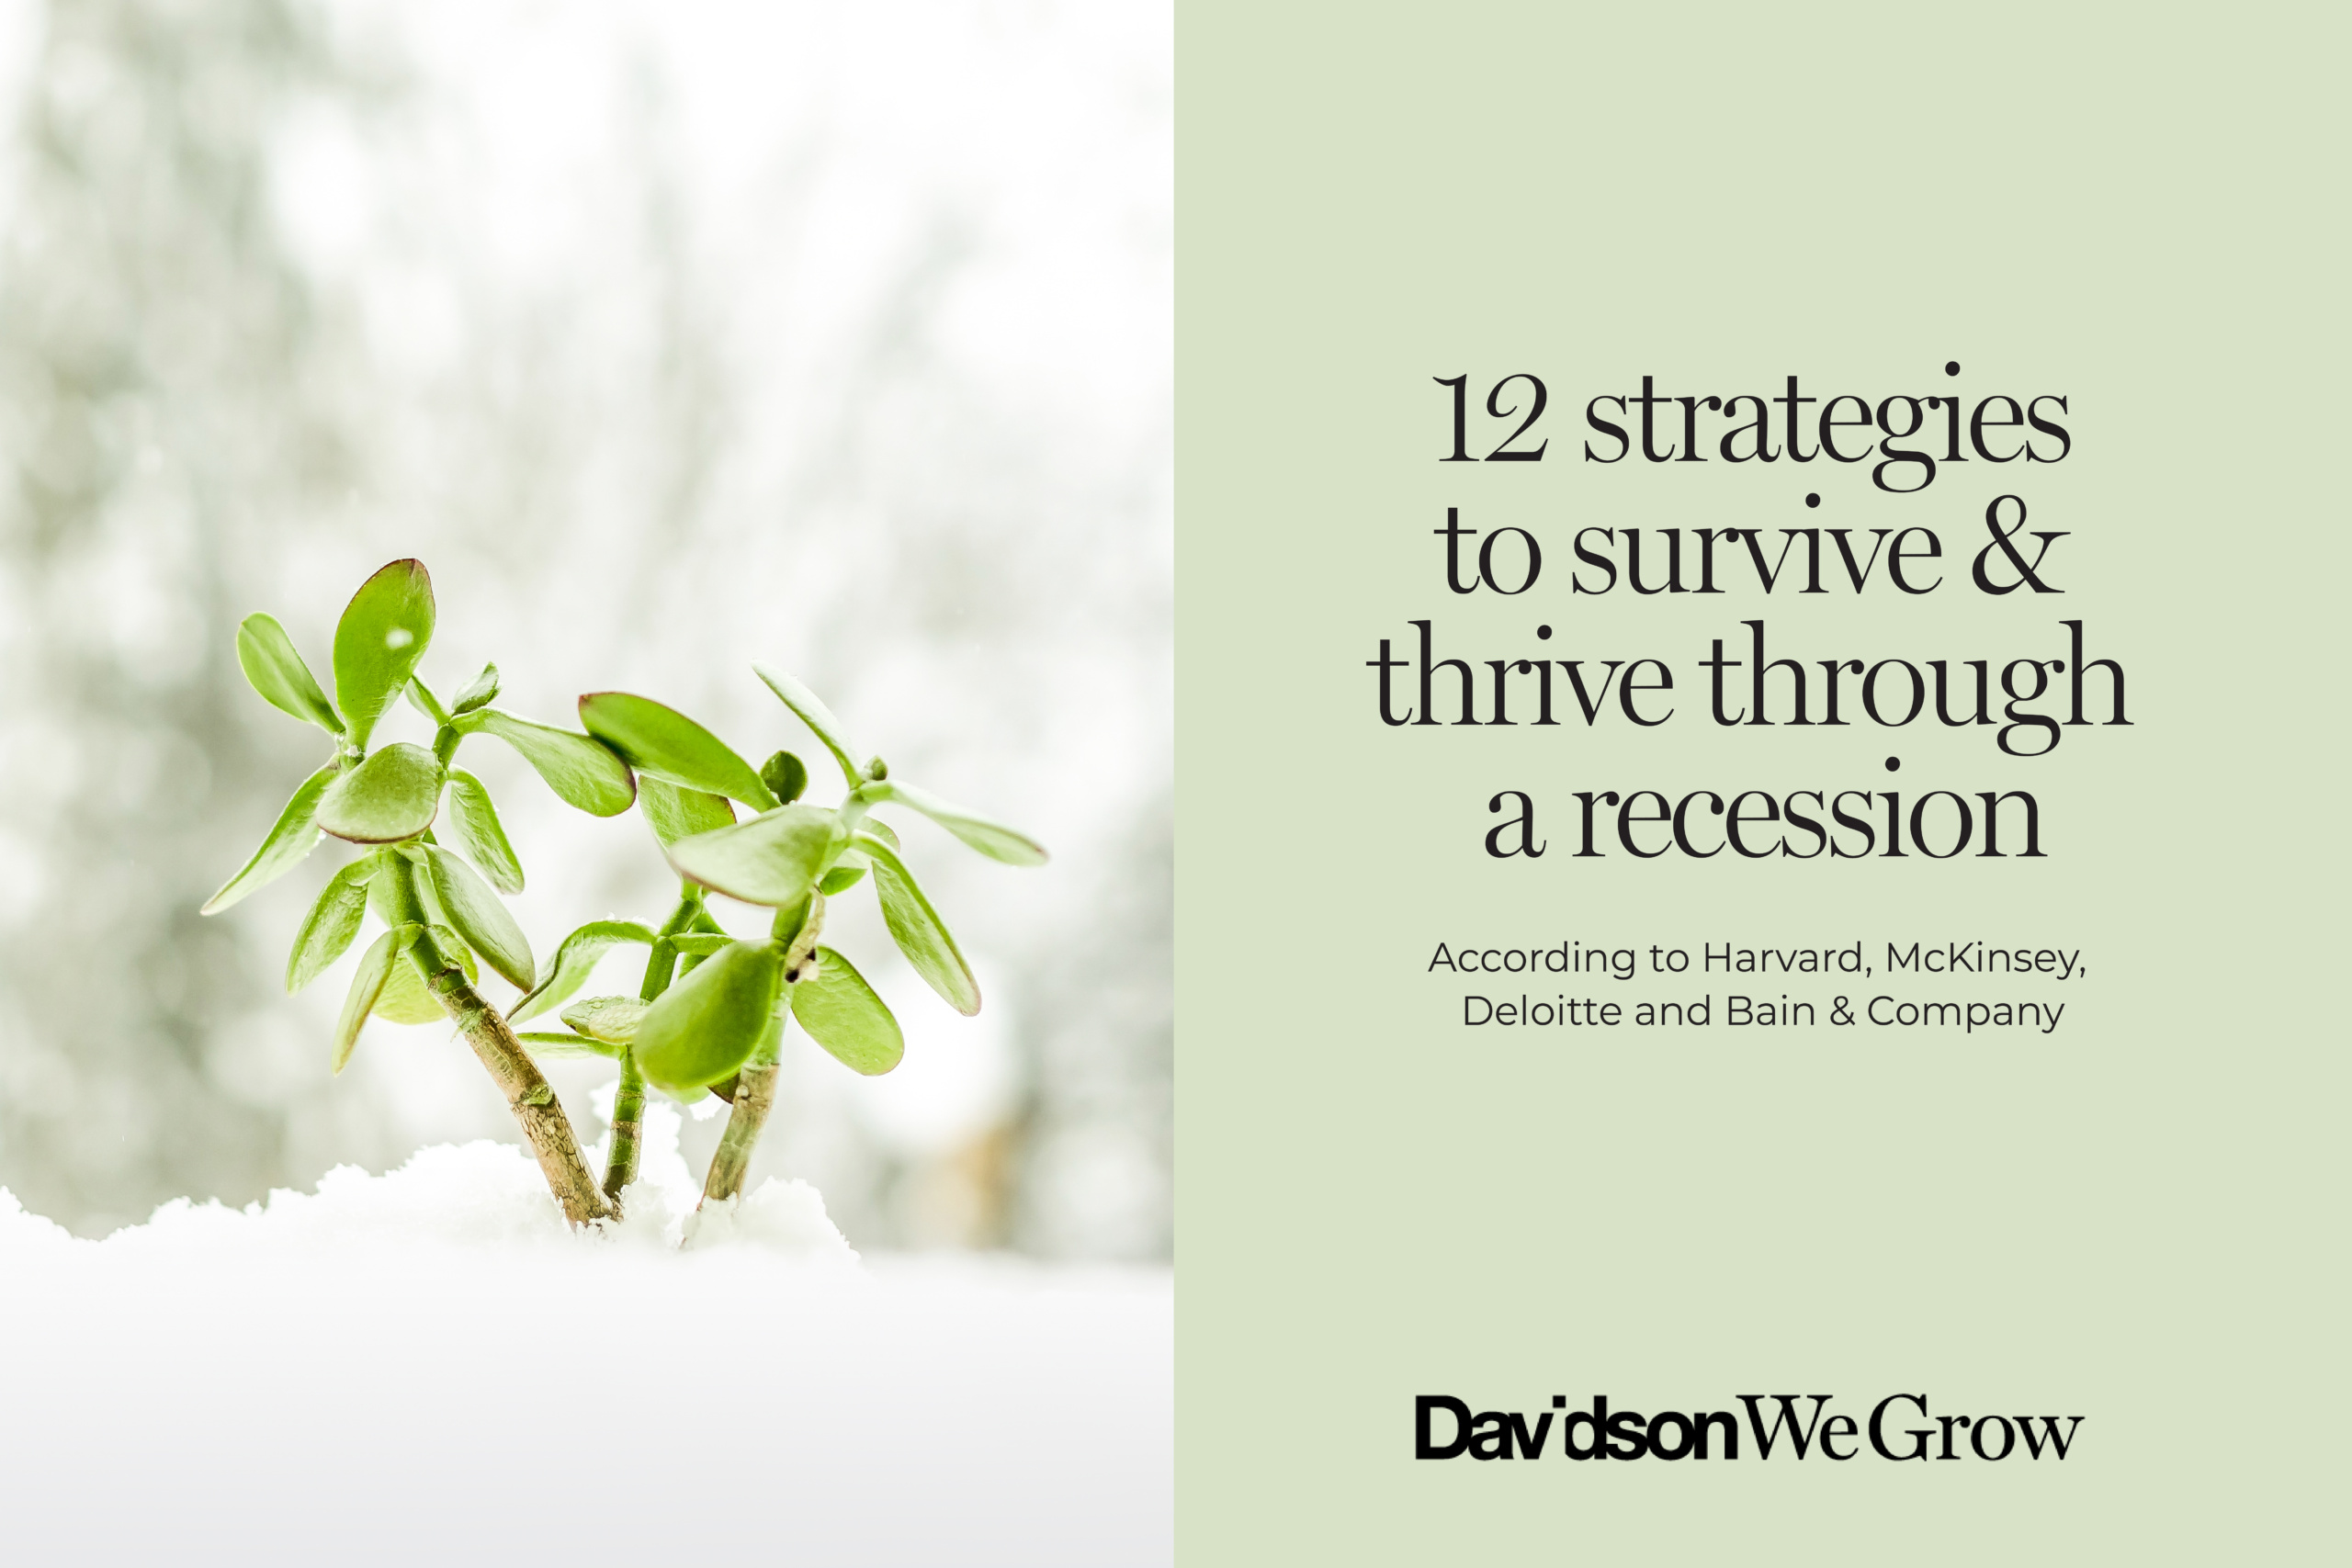 12 strategies to survive & thrive through a recession